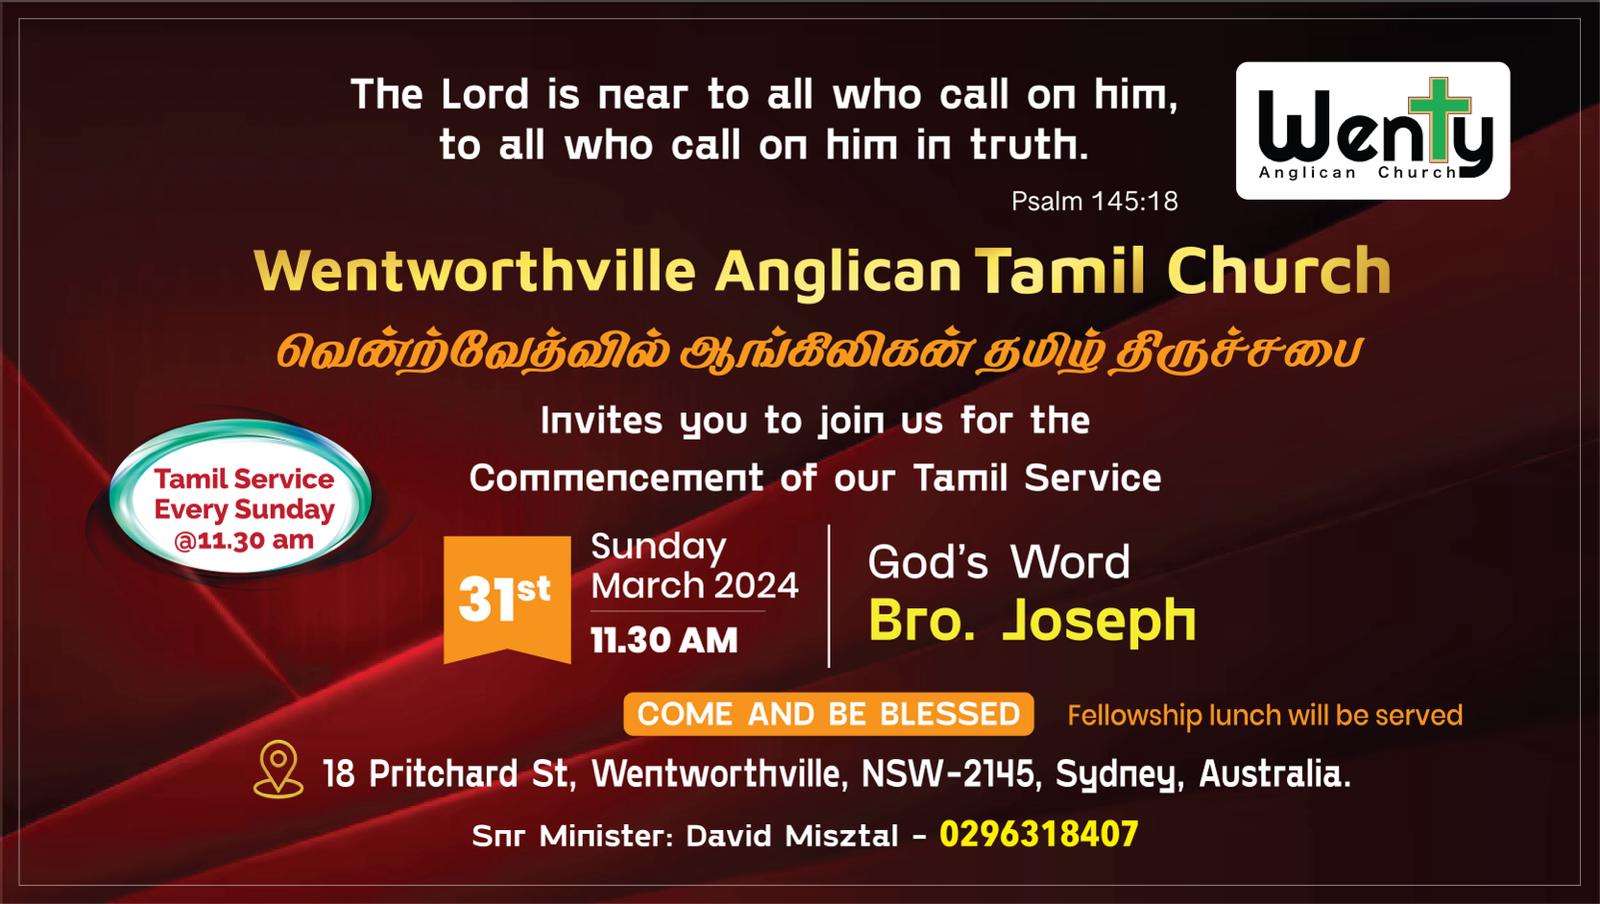 Wentworthville Anglican Tamil Church. Invites you to join us for the Commencement of our Tamil Service. Sunday 31st March 2024 11.30am. God's Word: Bro. Joseph. Come and be blessed.